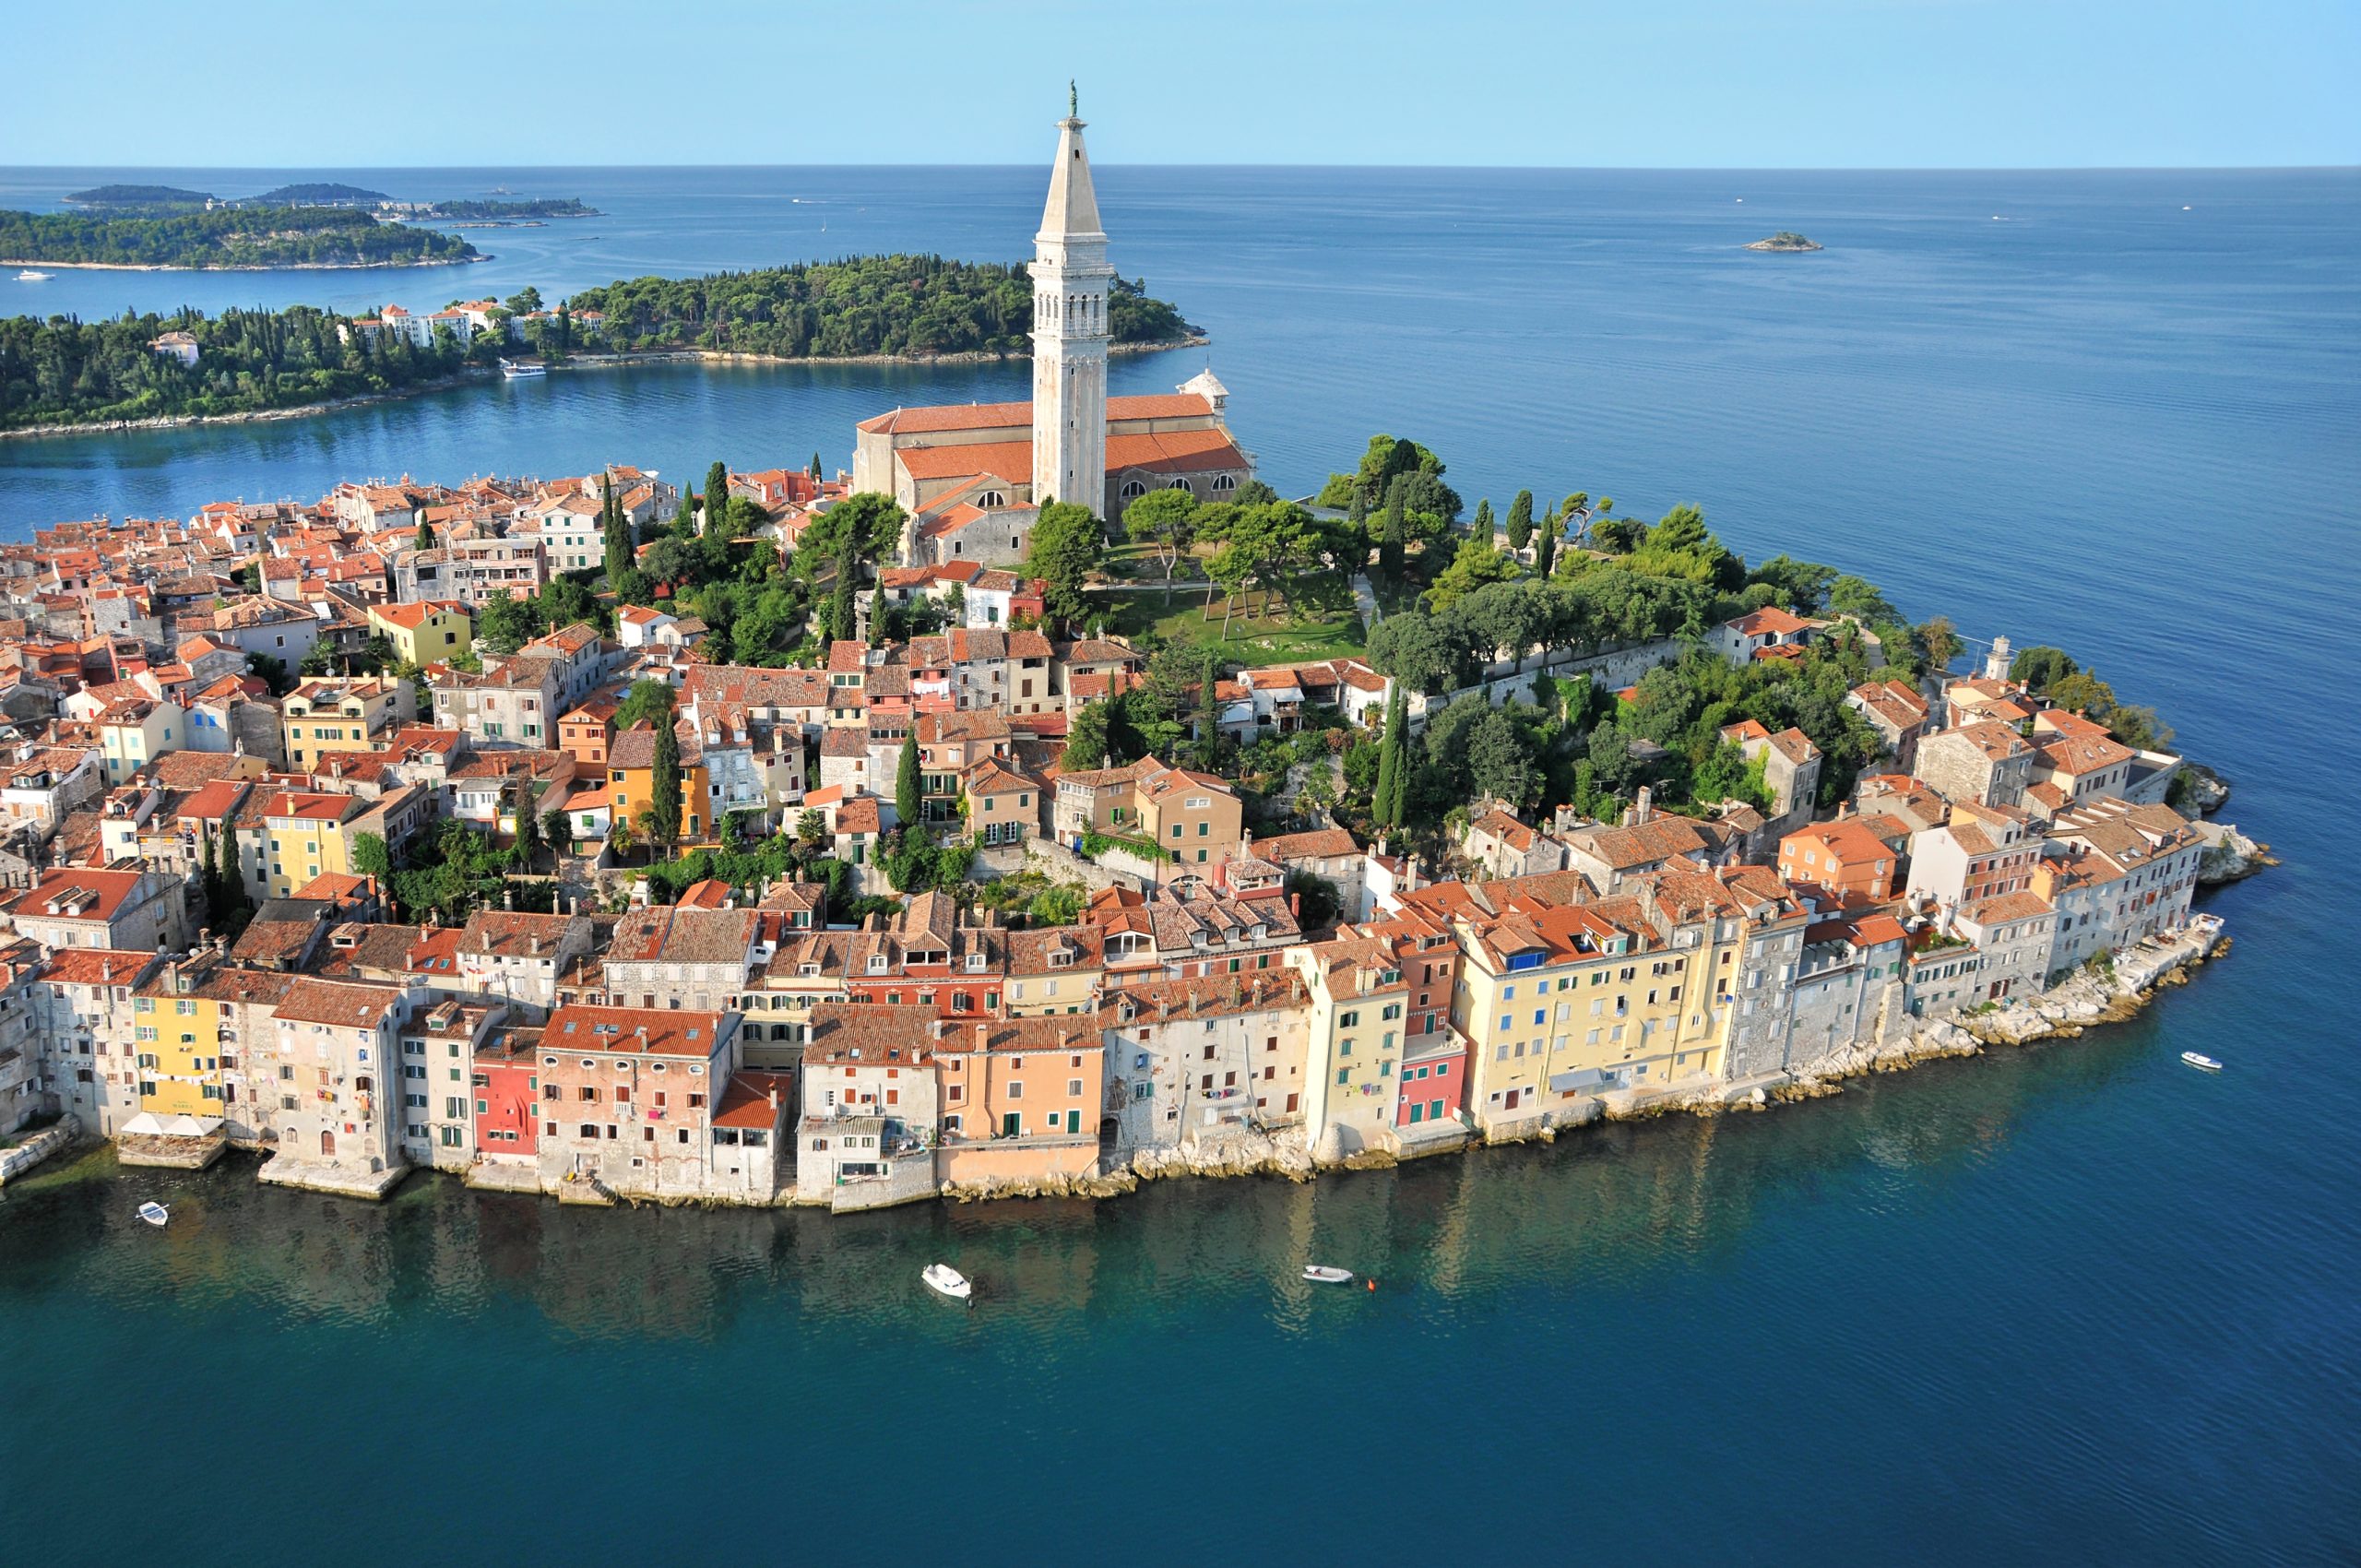  Rovinj  voted one of the top emerging travel destinations 